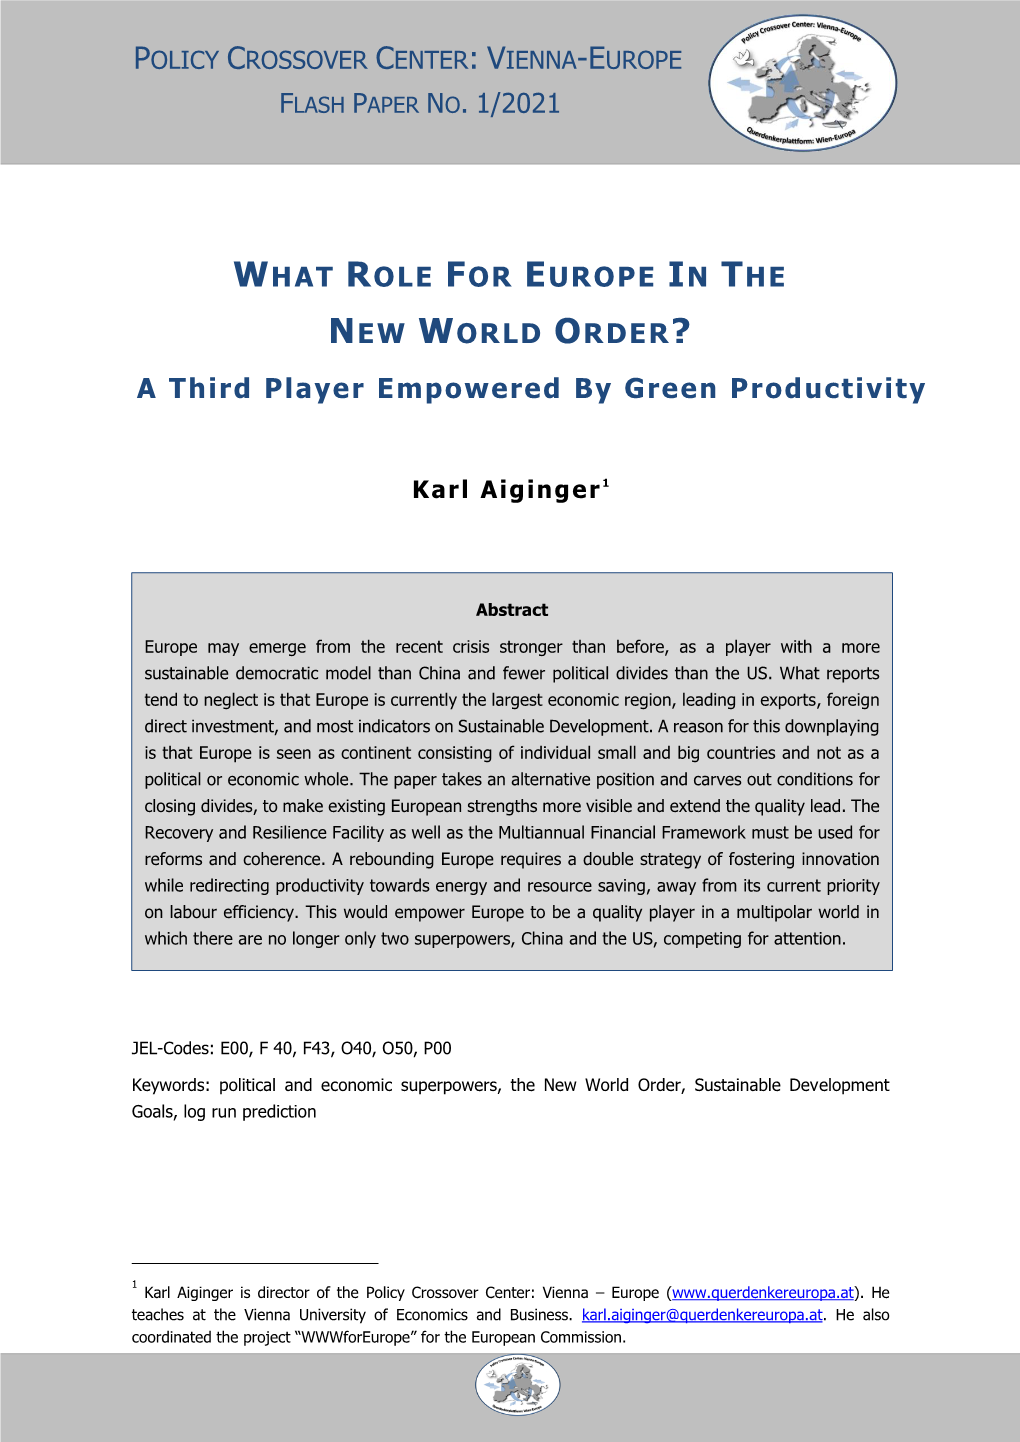 WHAT ROLE for EUROPE in the NEW WORLD ORDER? a Third Player Empowered by Green Productivity FLASH PAPER NO. 1/2021